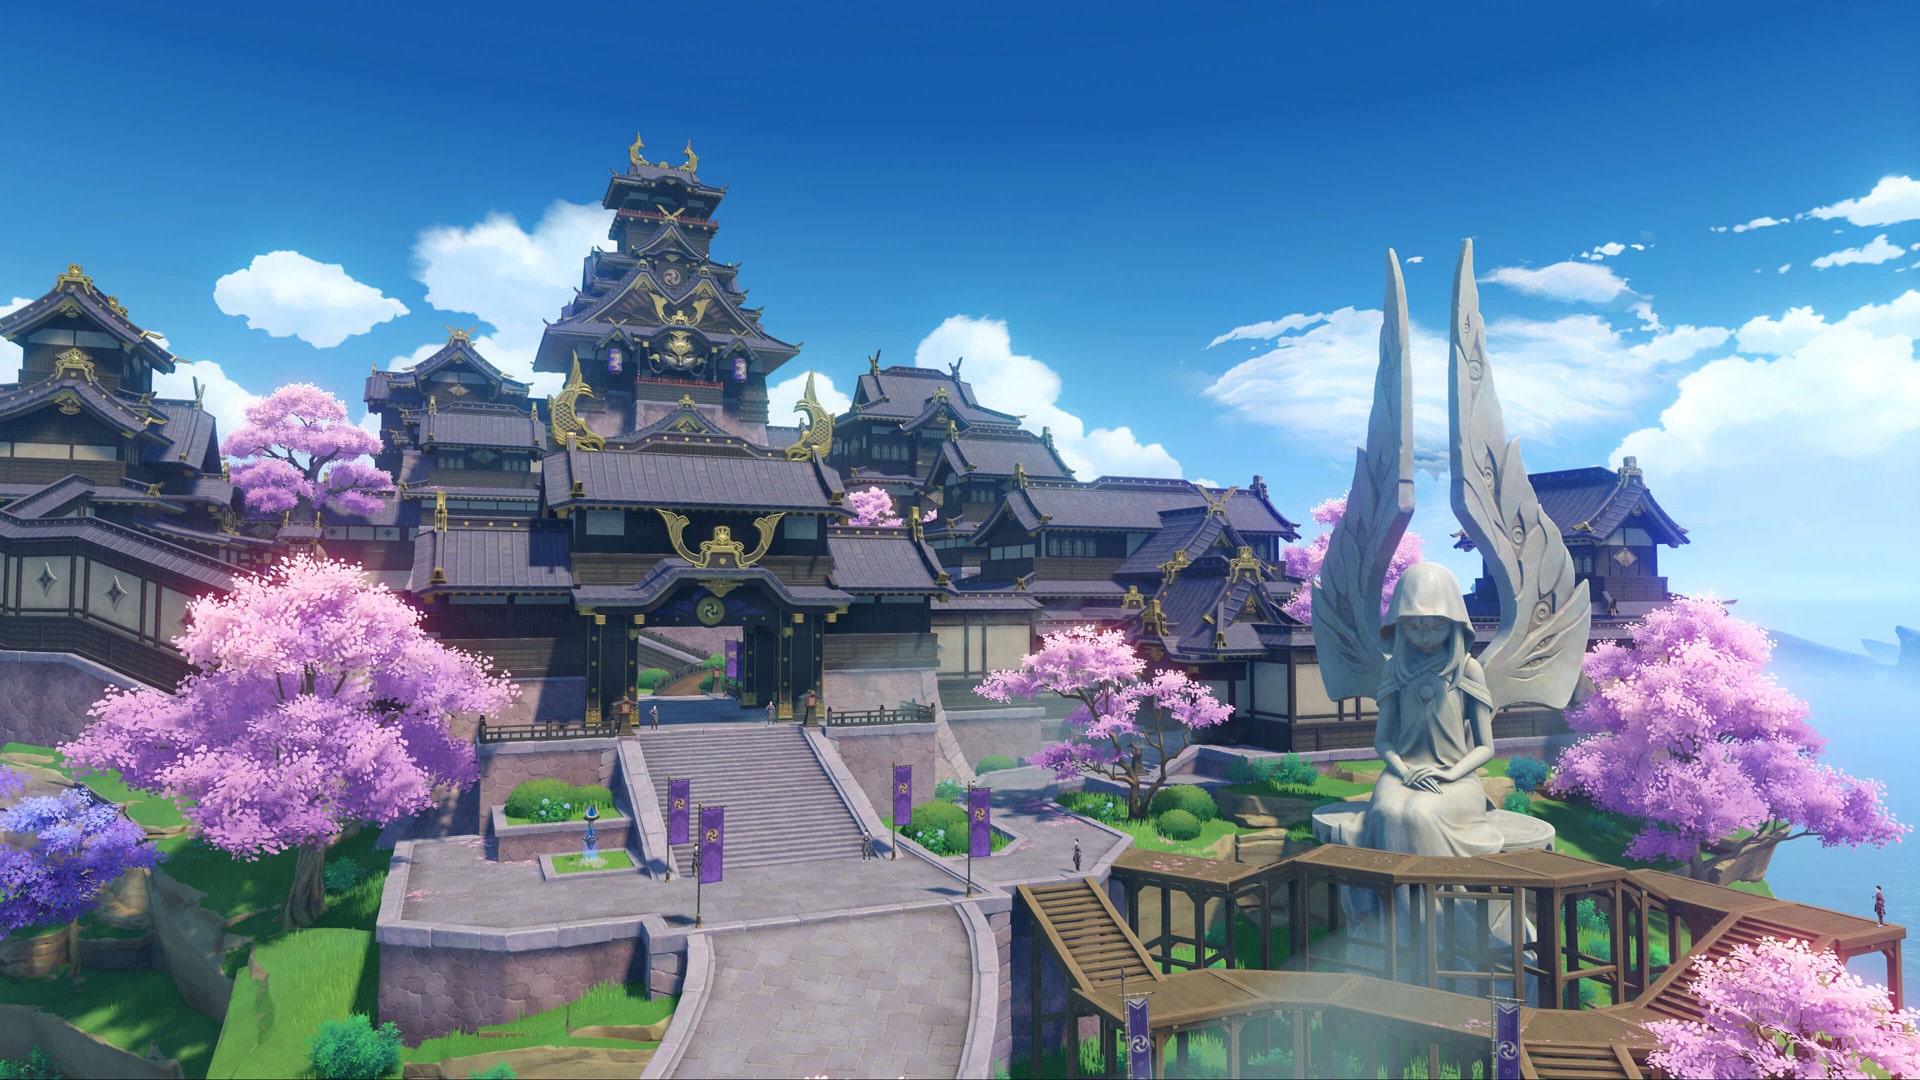 Picturesque landscape from Genshin Impact, showcasing the game's stunning virtual environment